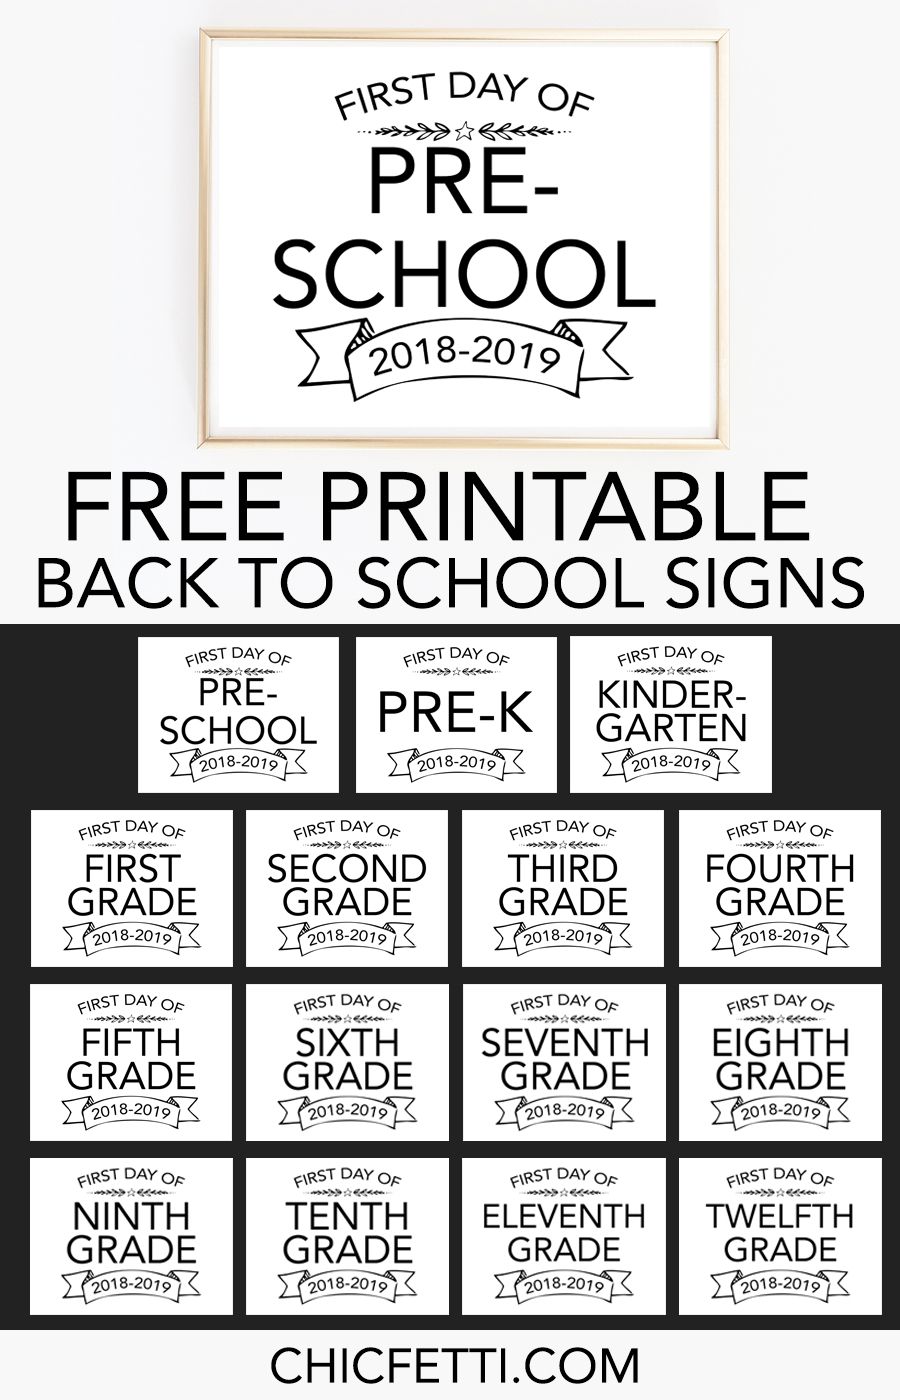 Printable Back To School Signs - Print Our Free First Day Of School - Free Printable Back To School Signs